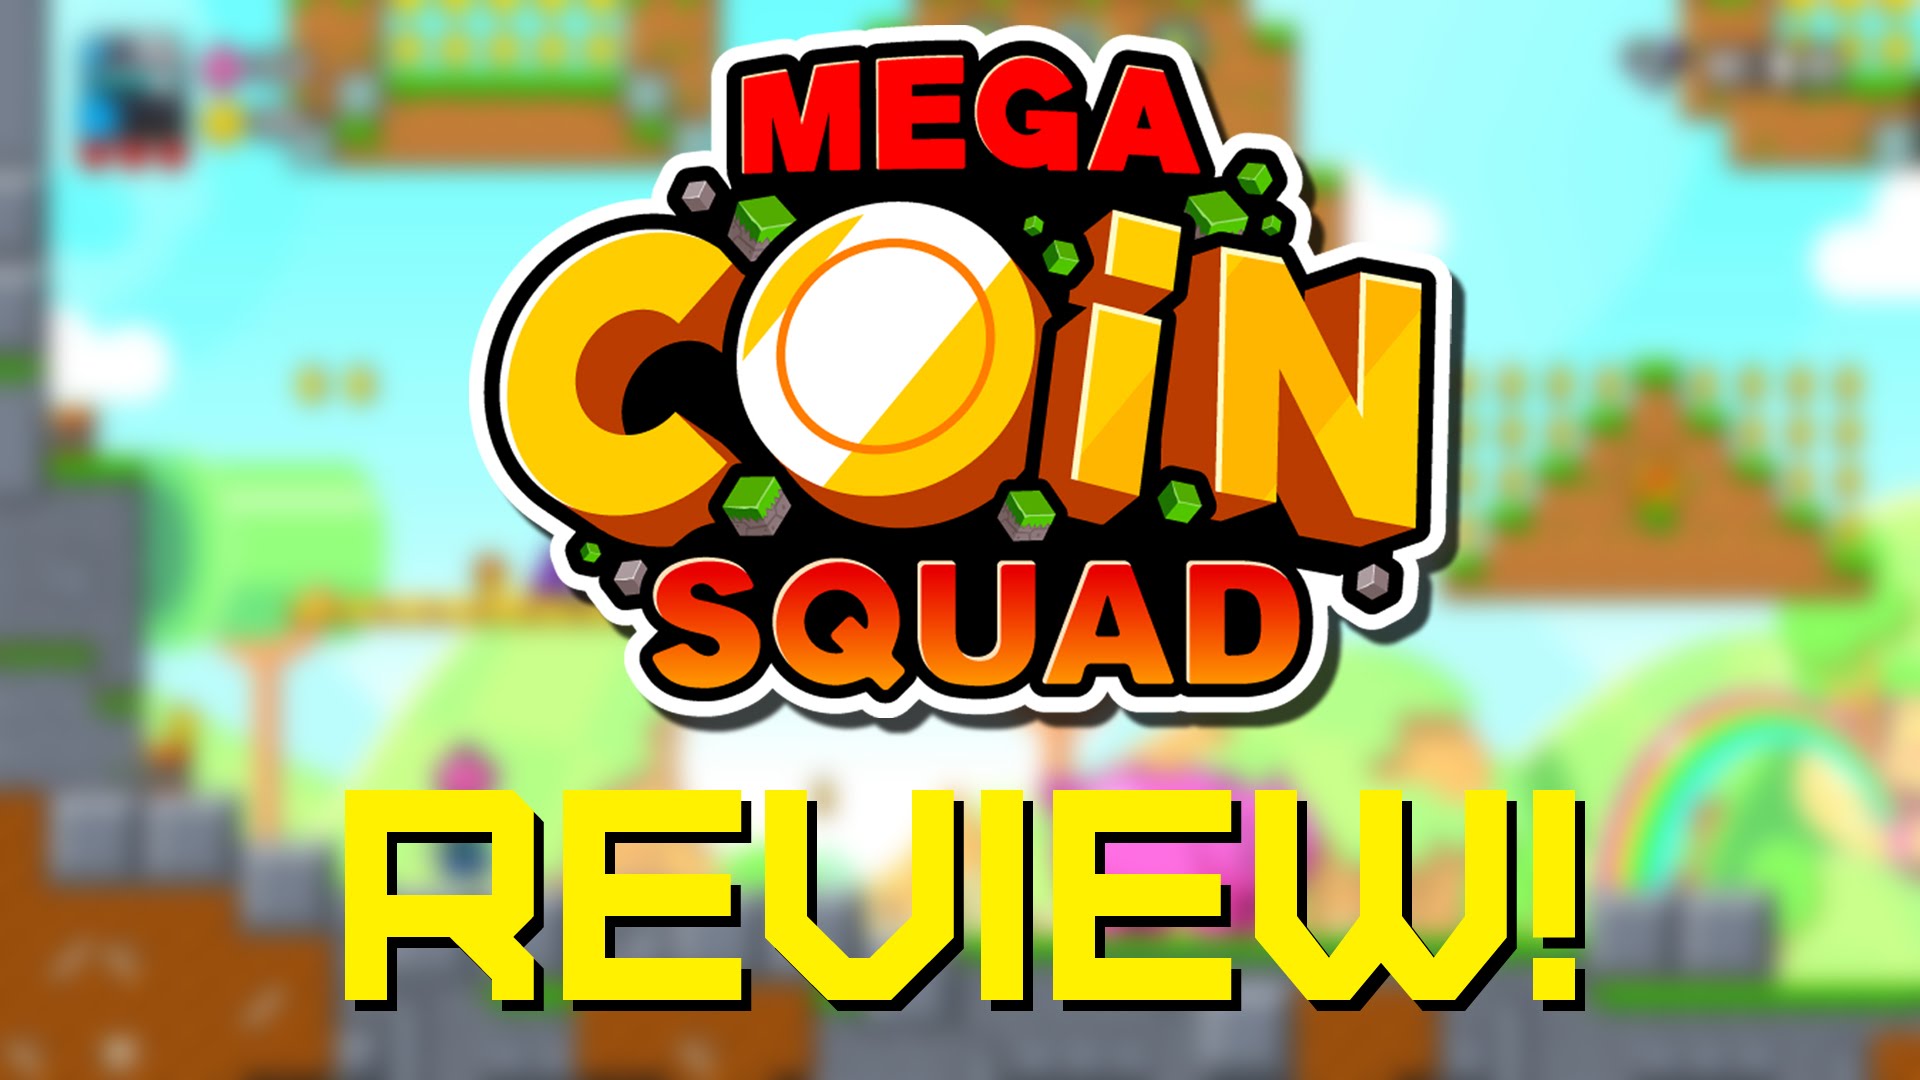 Images of Mega Coin Squad | 1920x1080